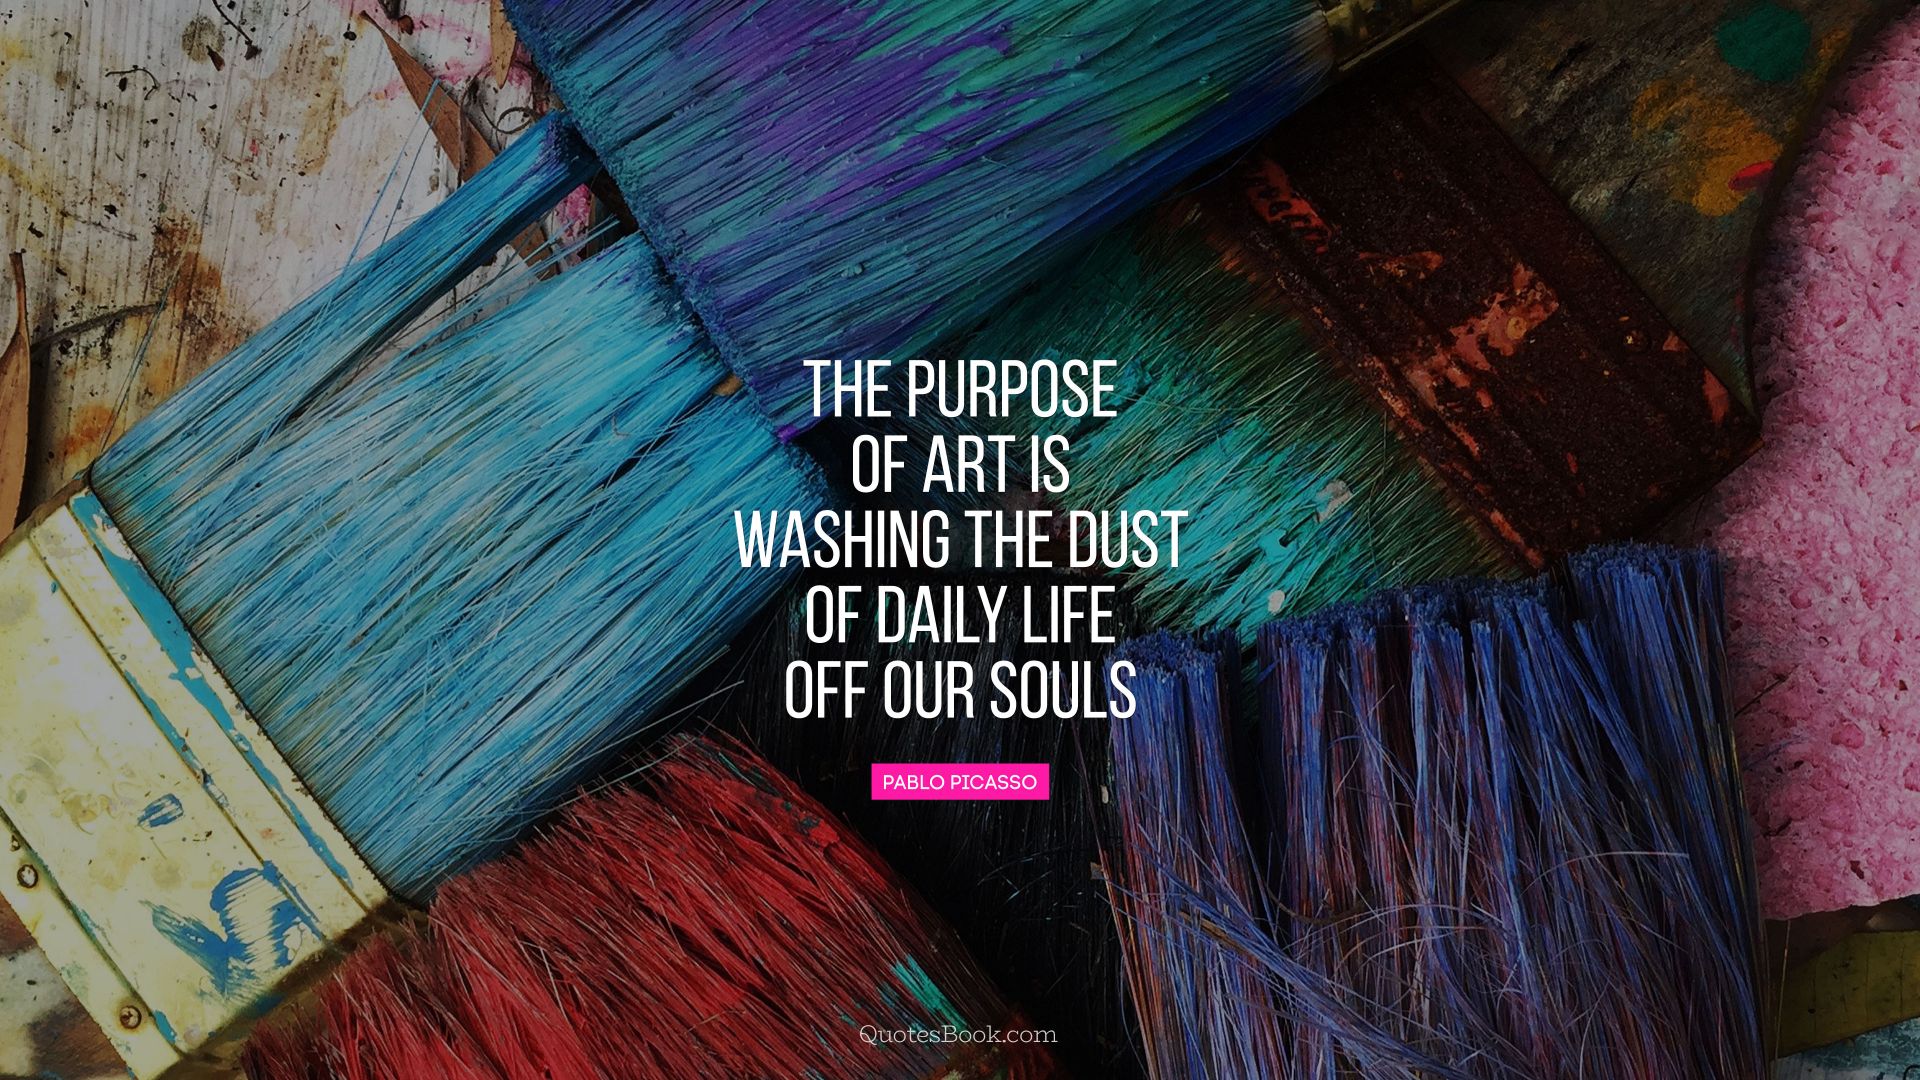 The purpose of art is washing the dust of daily life off our souls. - Quote by Pablo Picasso